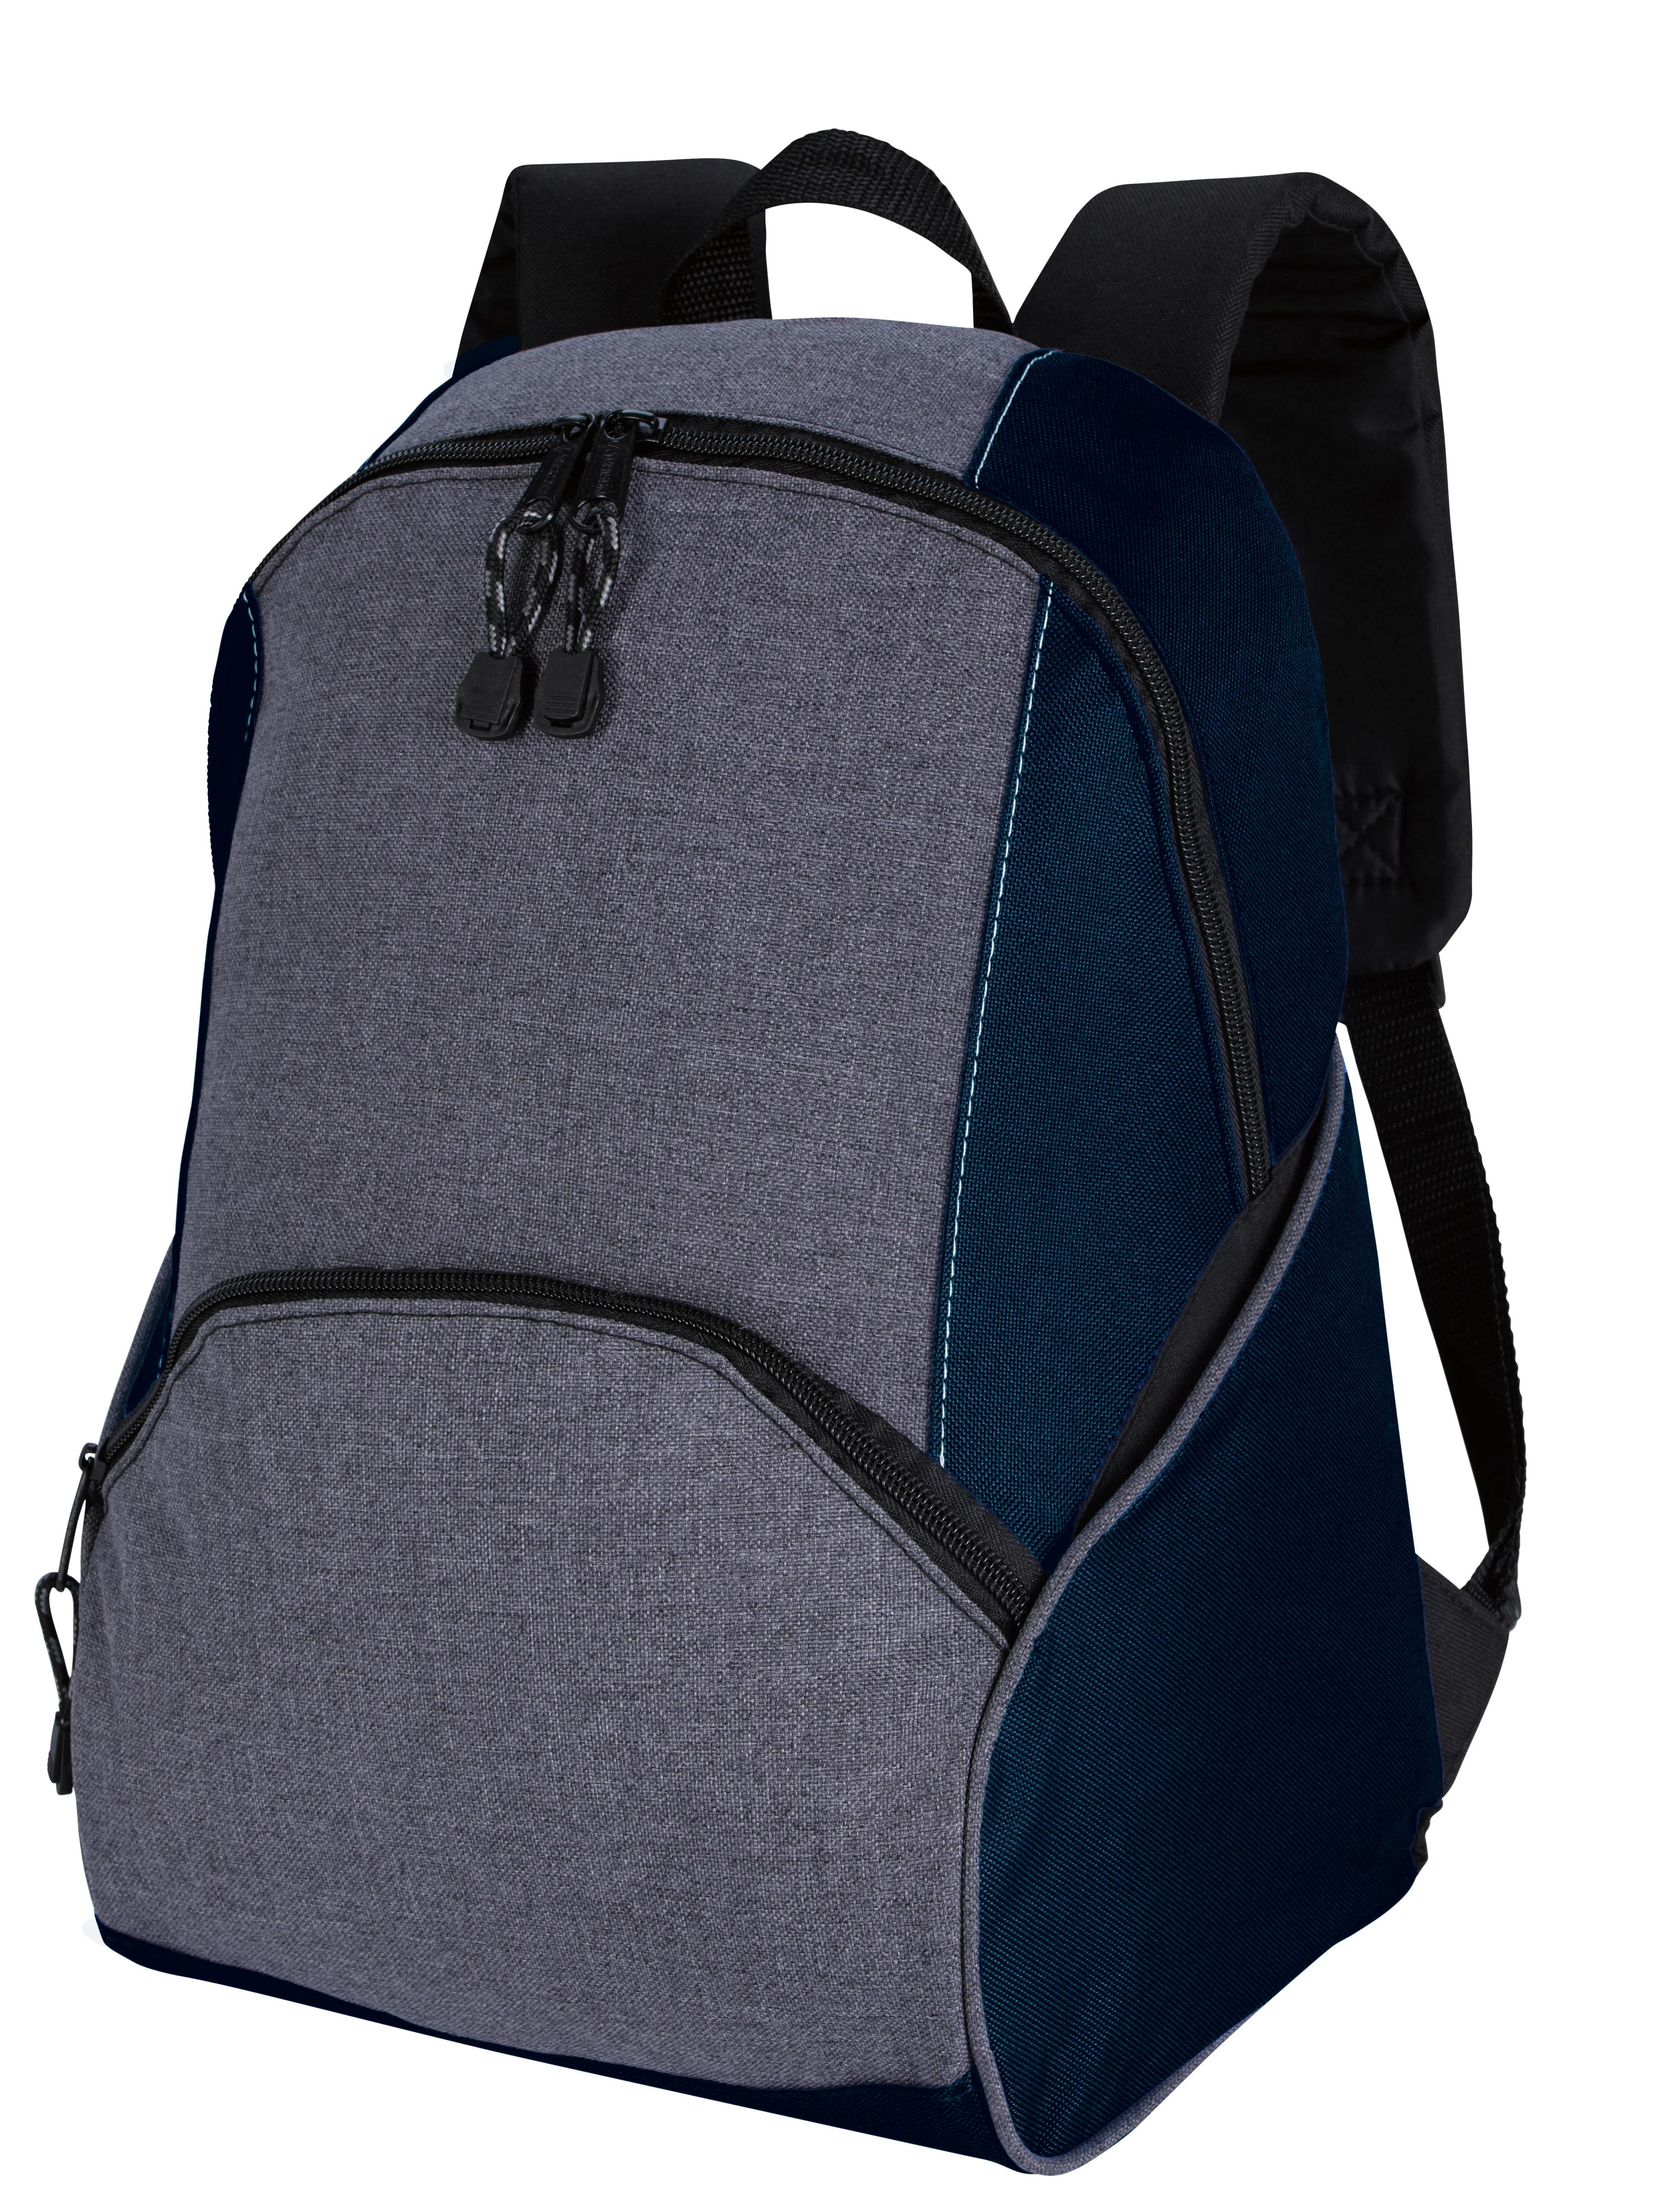 Two-Tone On the Move Backpack 9 of 25